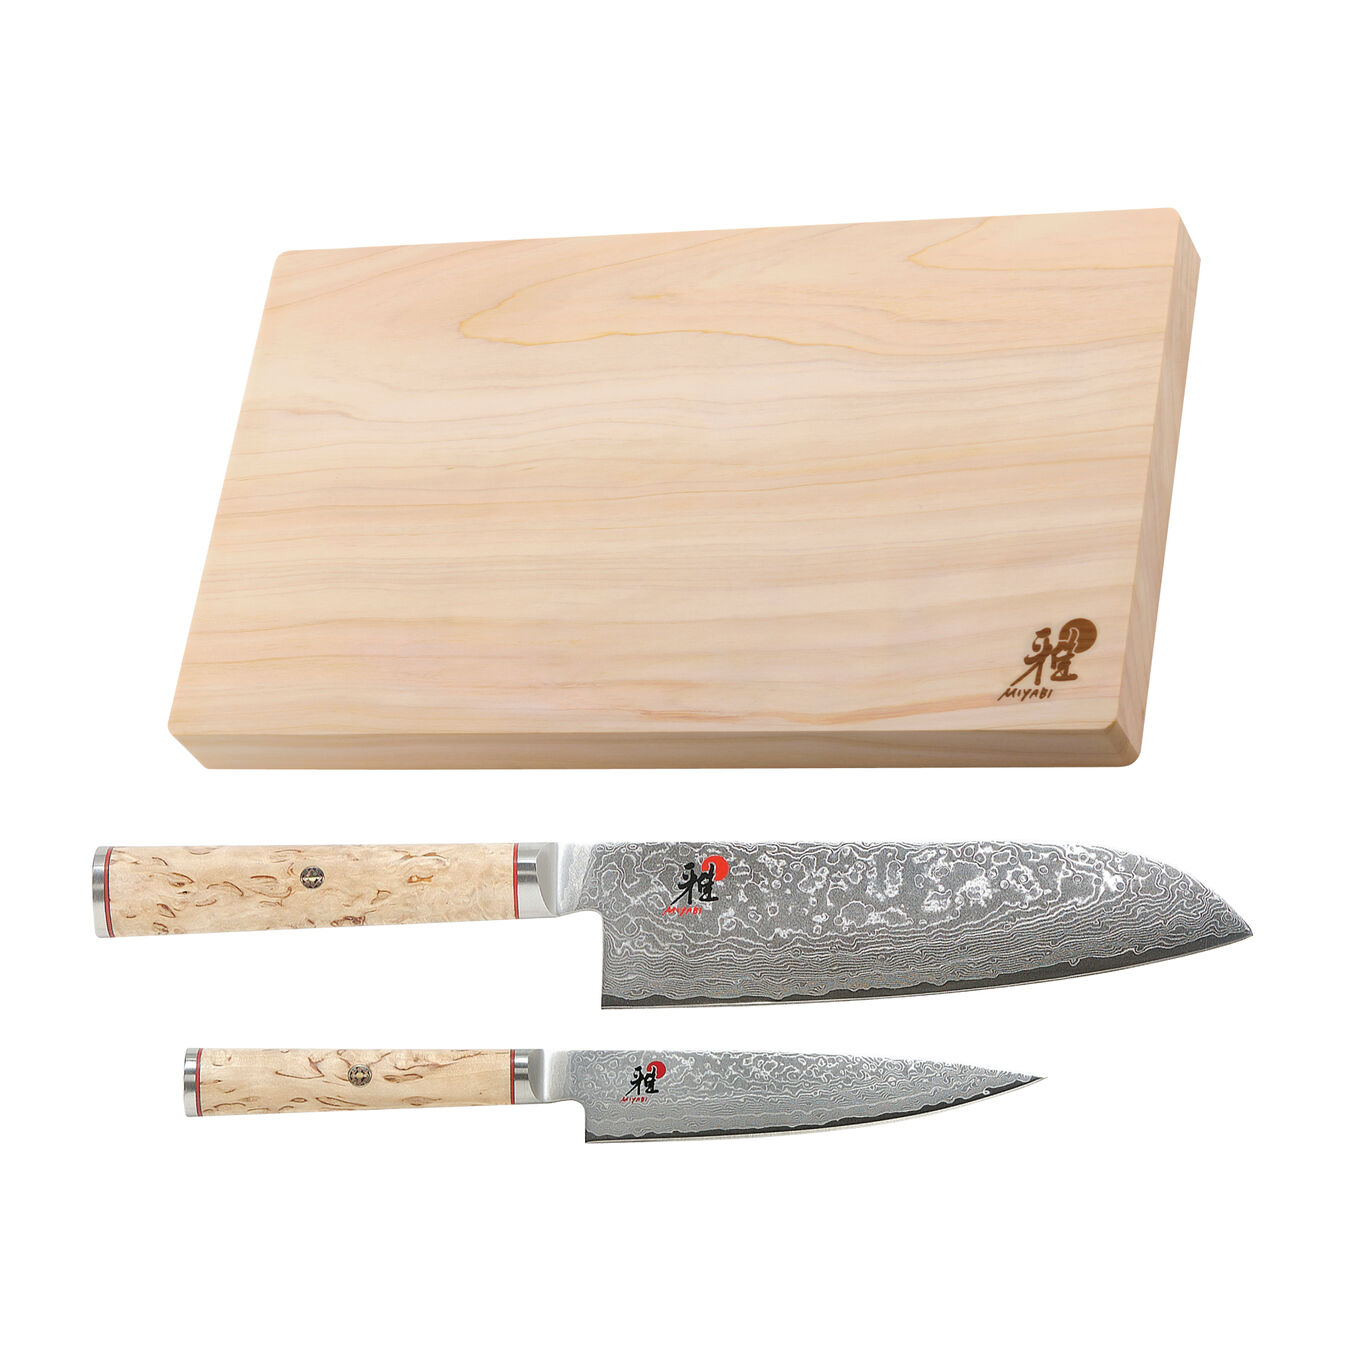 2 PC KNIFE SET WITH CUTTING BOARD,,large 1